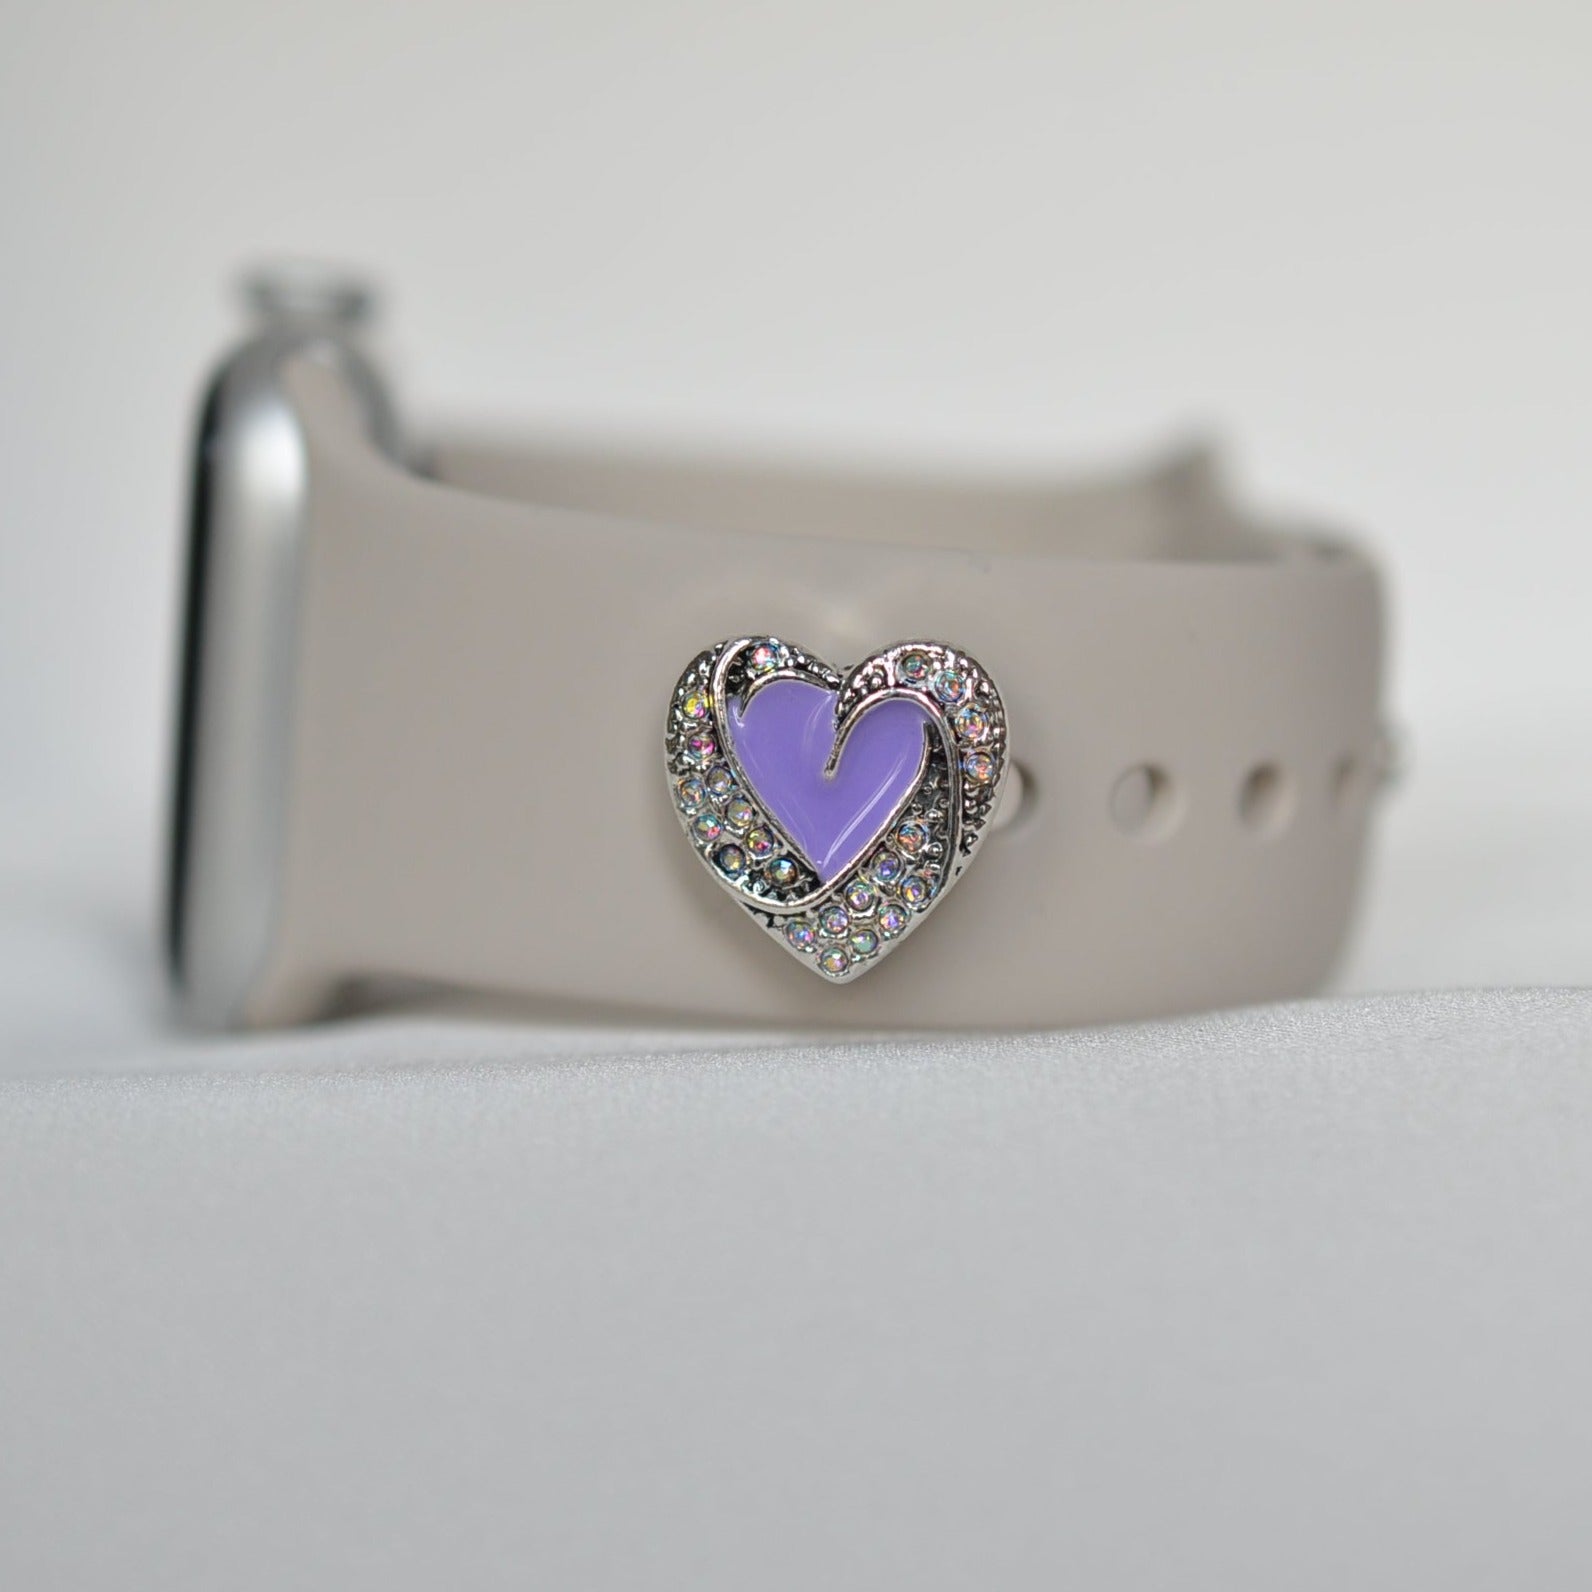 Purple Heart Charm for Belts, Bags and Watch Bands